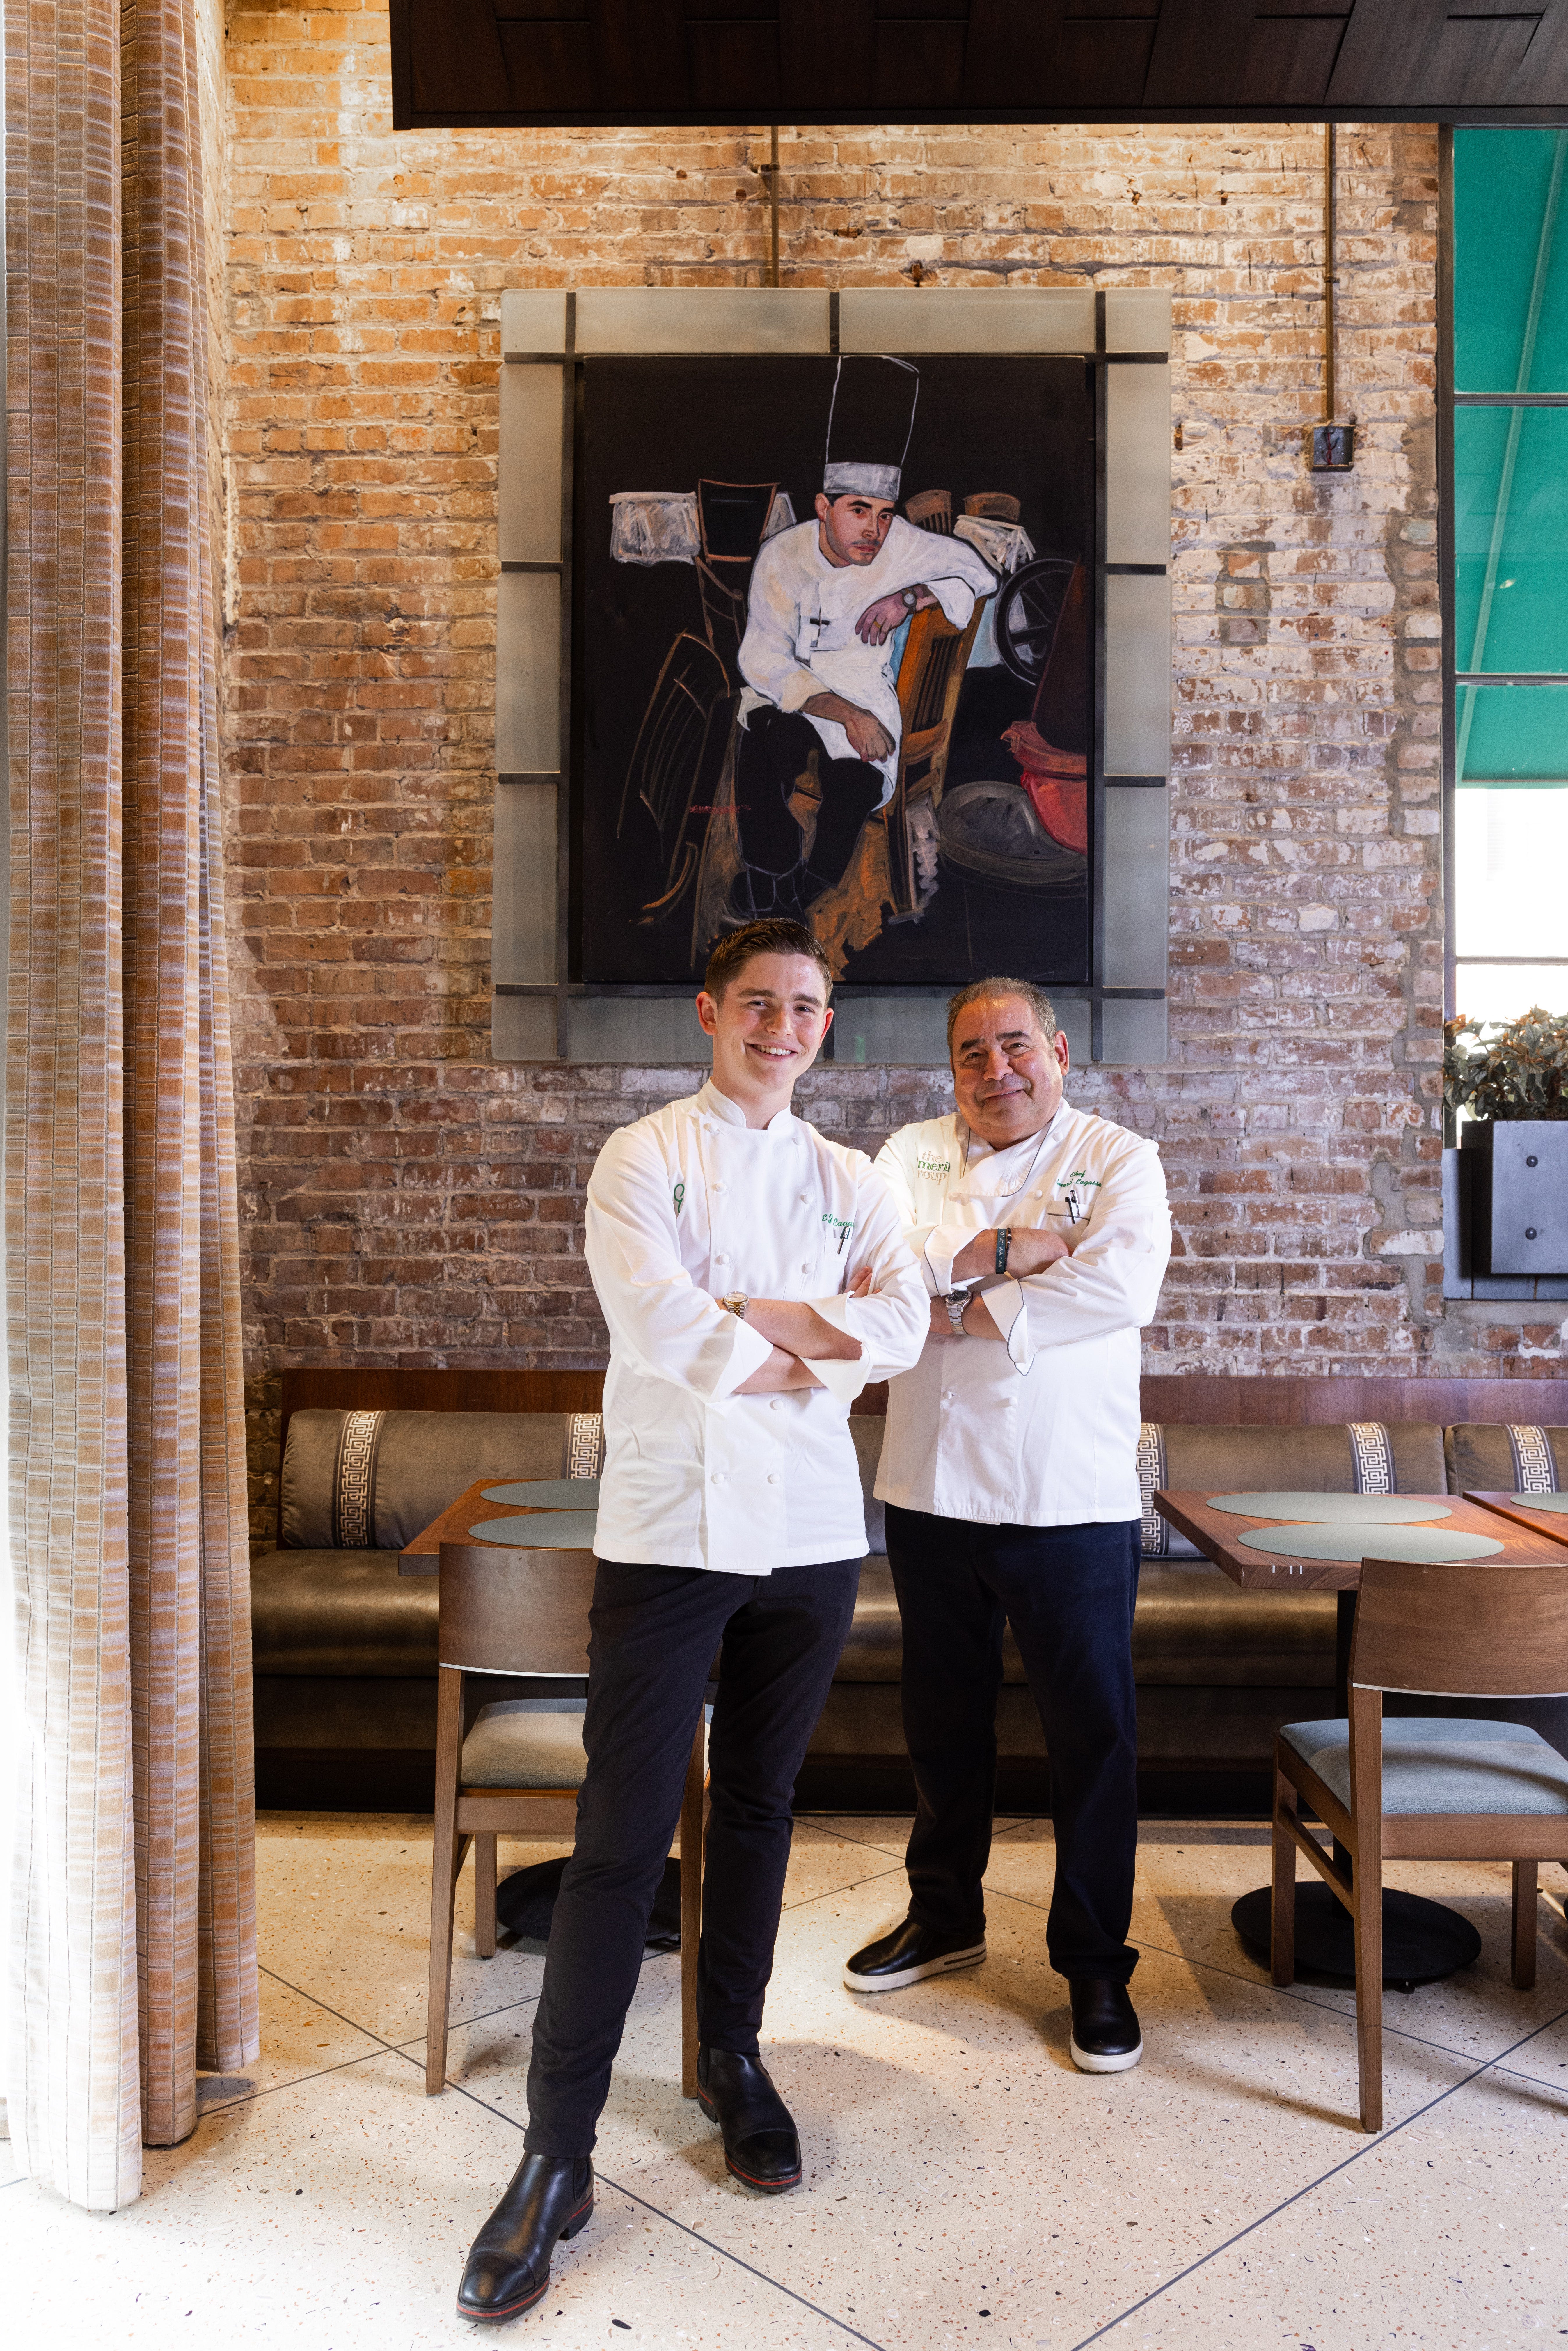 Emeril Lagasse talks about how his tour of Fall River will play into in his new restaurant